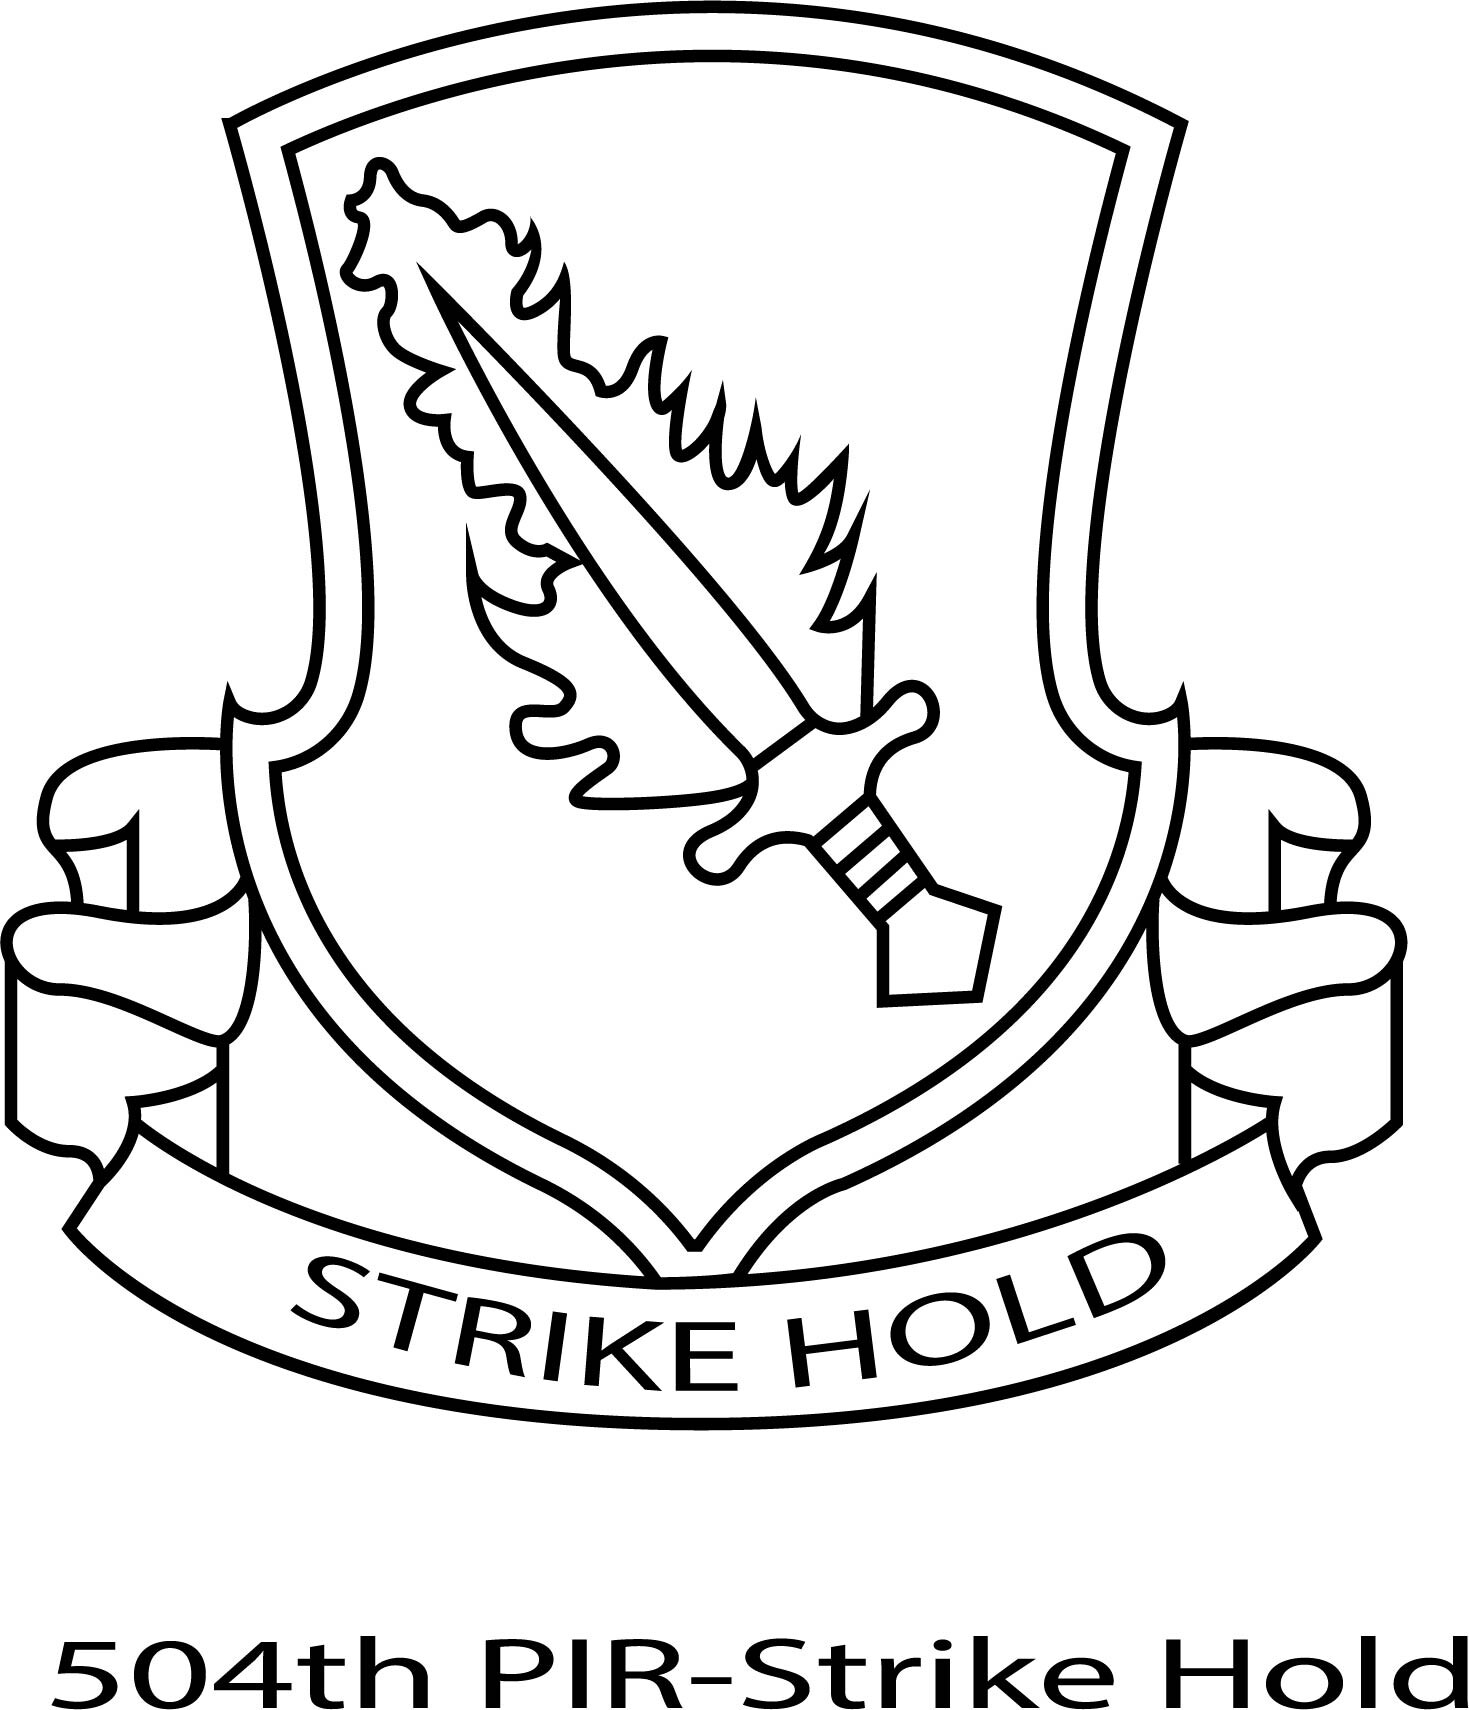 504th PIR-Strike Hold US ARMY AIRBORNE WINGS & PARACHUTE INFANTRY VECTOR  FILE Black white vector outline or line art file for cnc laser cutting,  wood